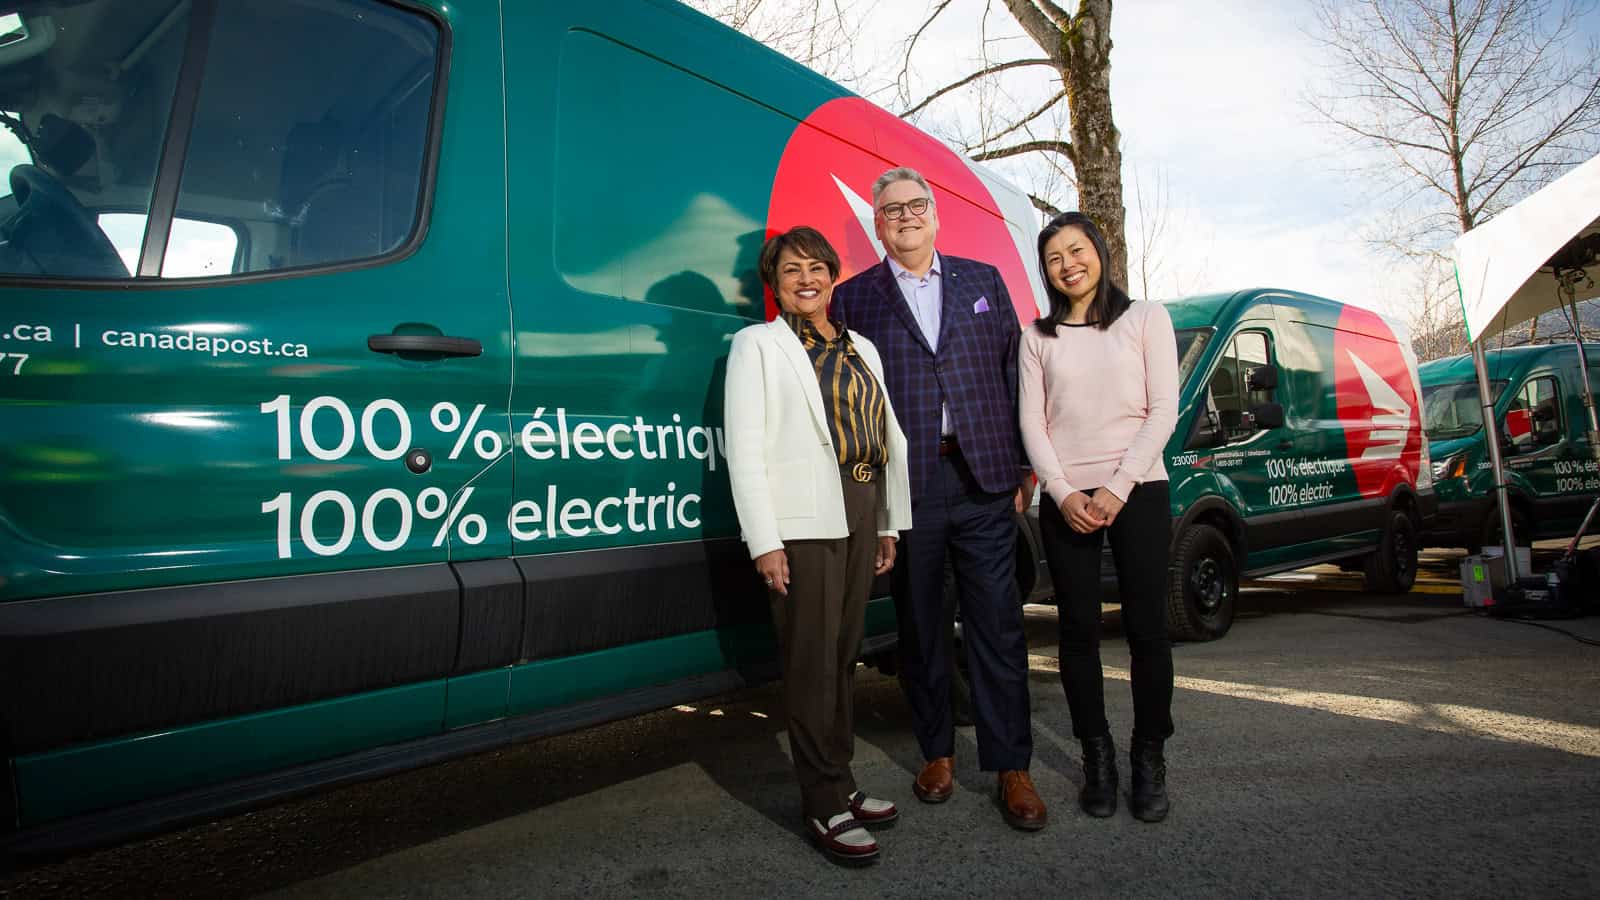 Canada Faces Climate Challenges, Canada Post Steps Up with Electric Vehicle Fleet